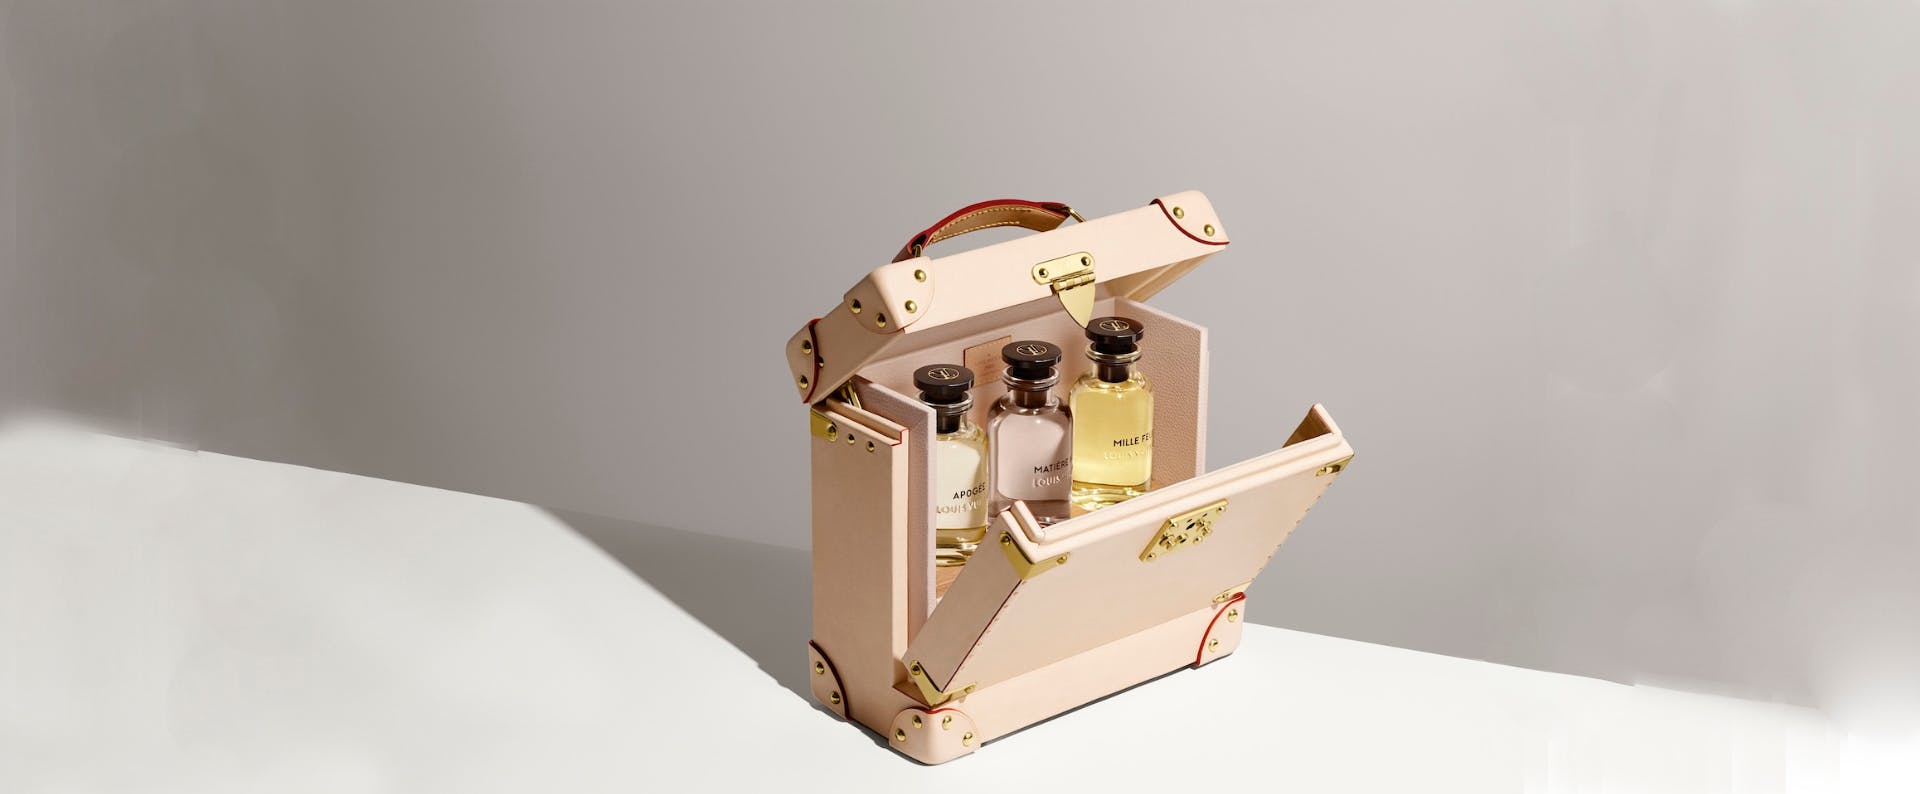 Louis Vuitton perfumes and leather goods: VVN calfskin travel cases